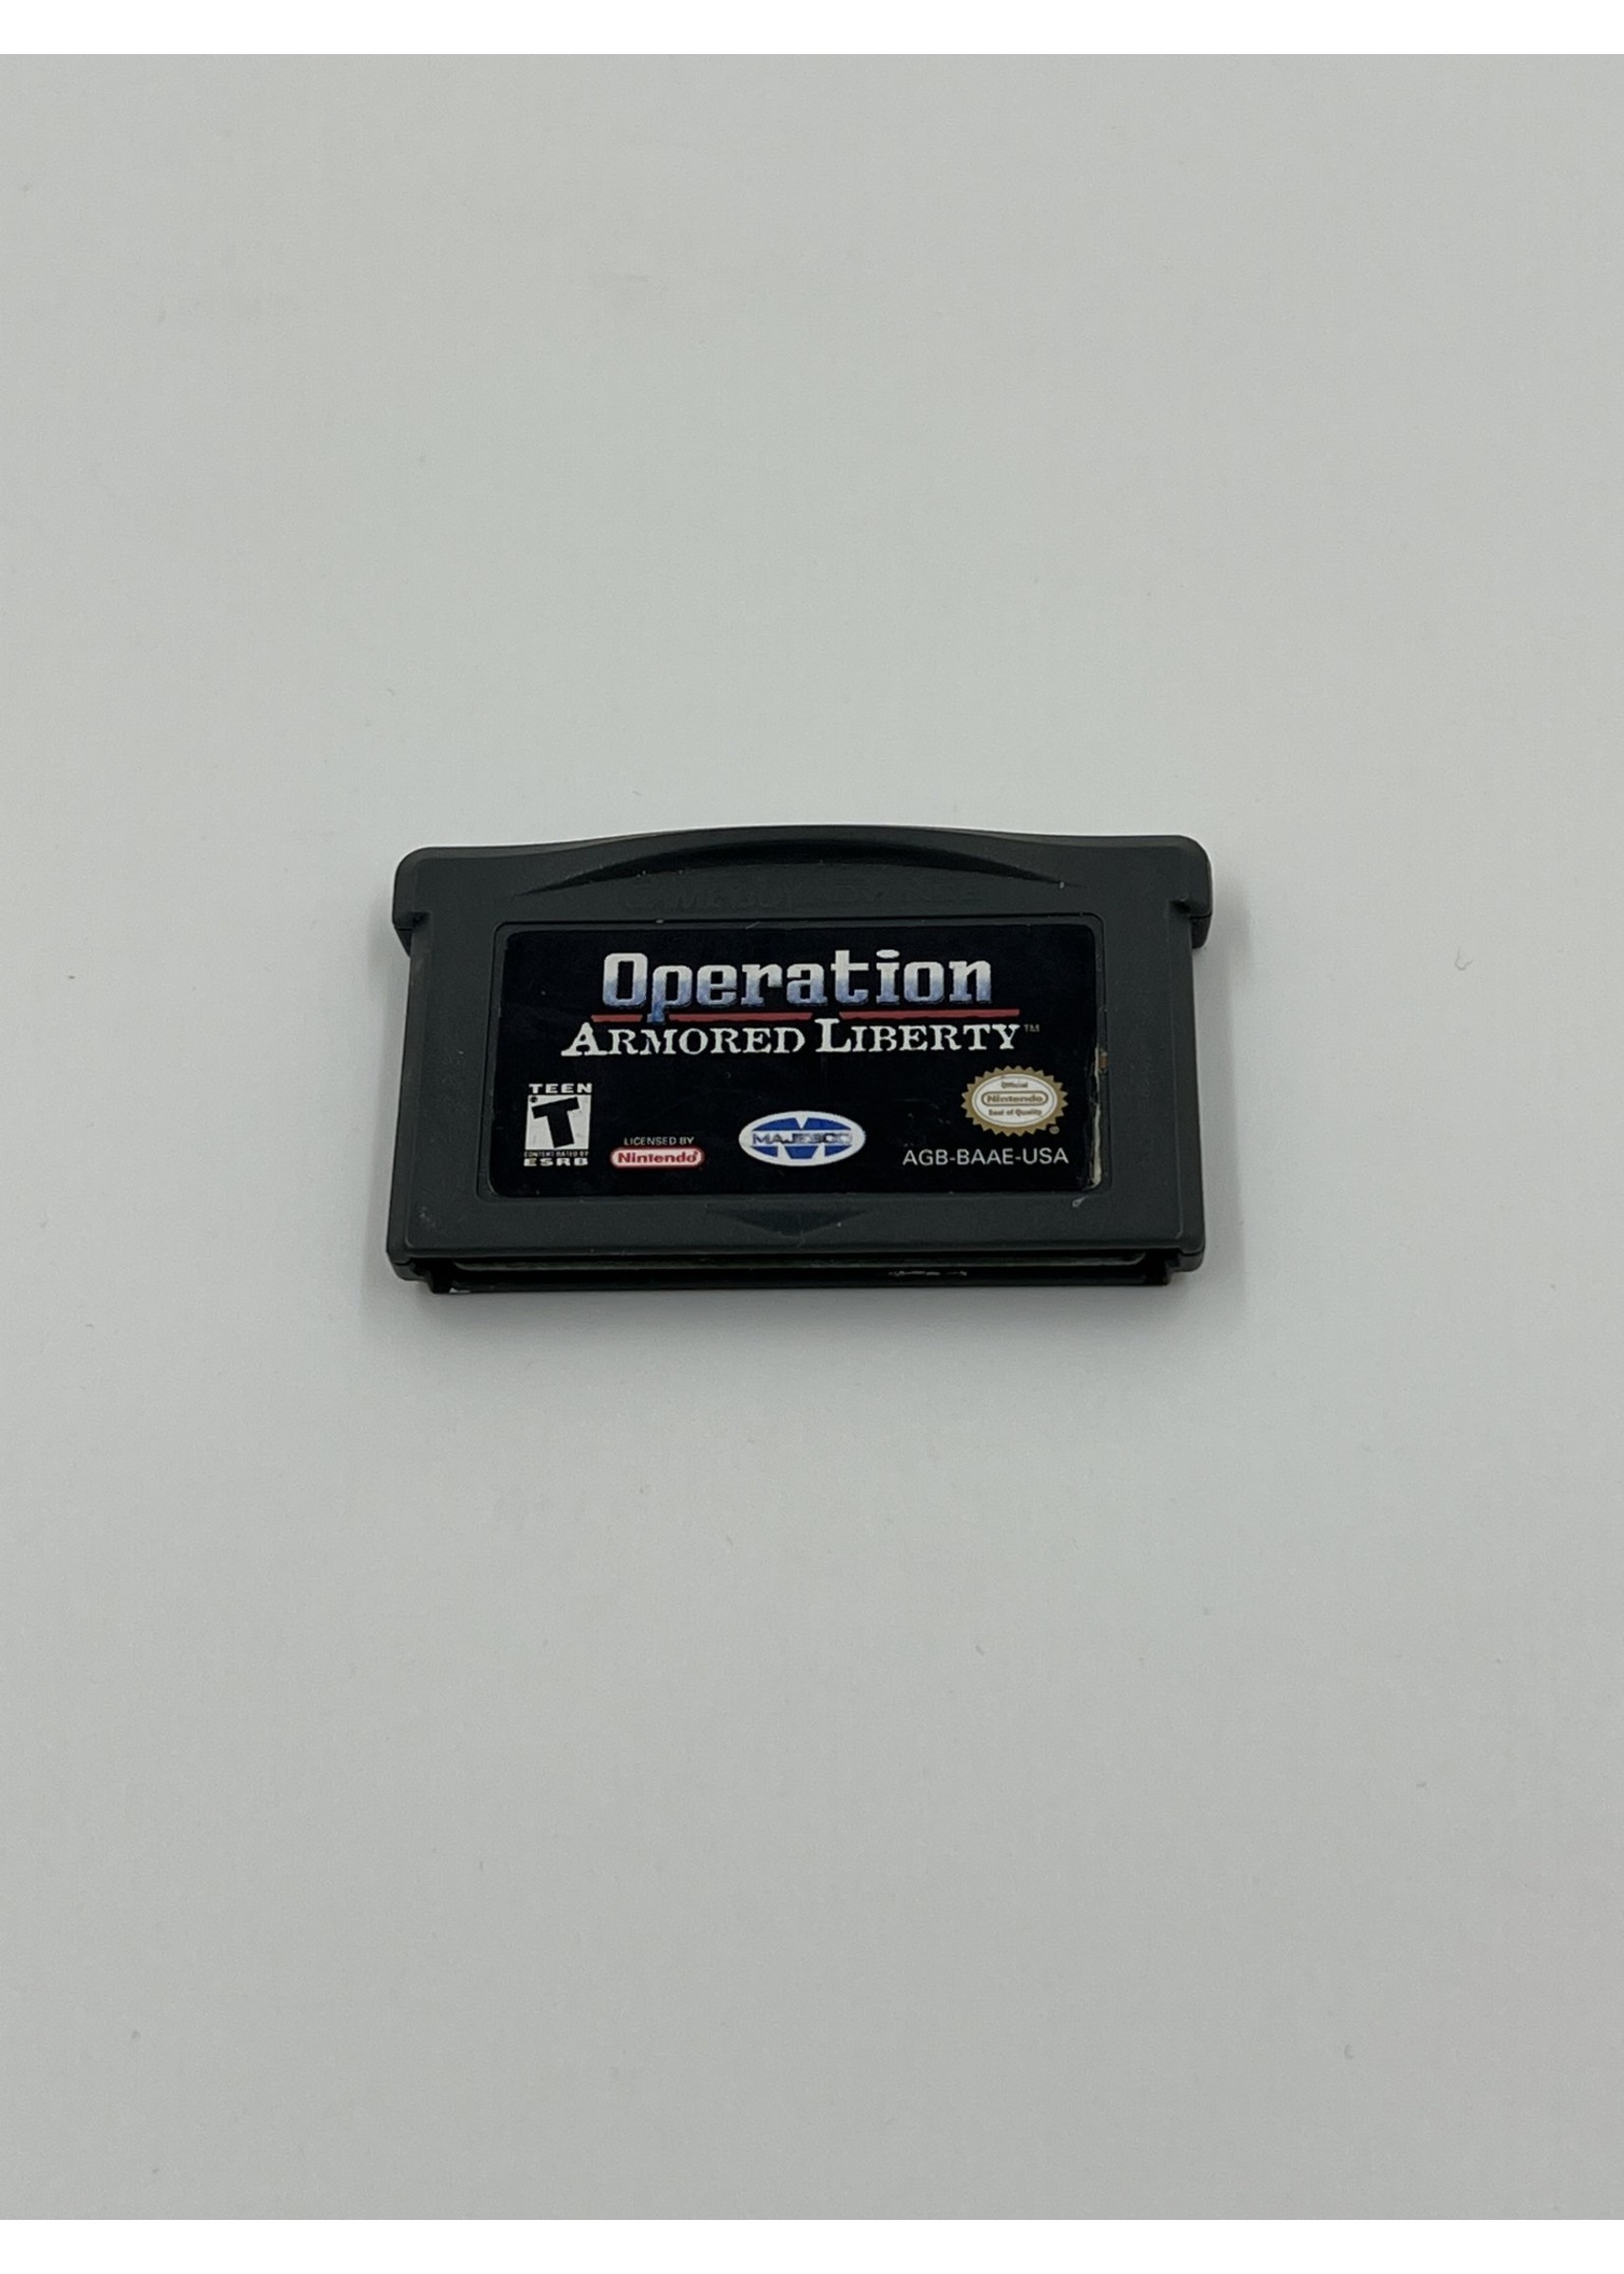 GameBoy Advance Operation Armored Liberty Gba